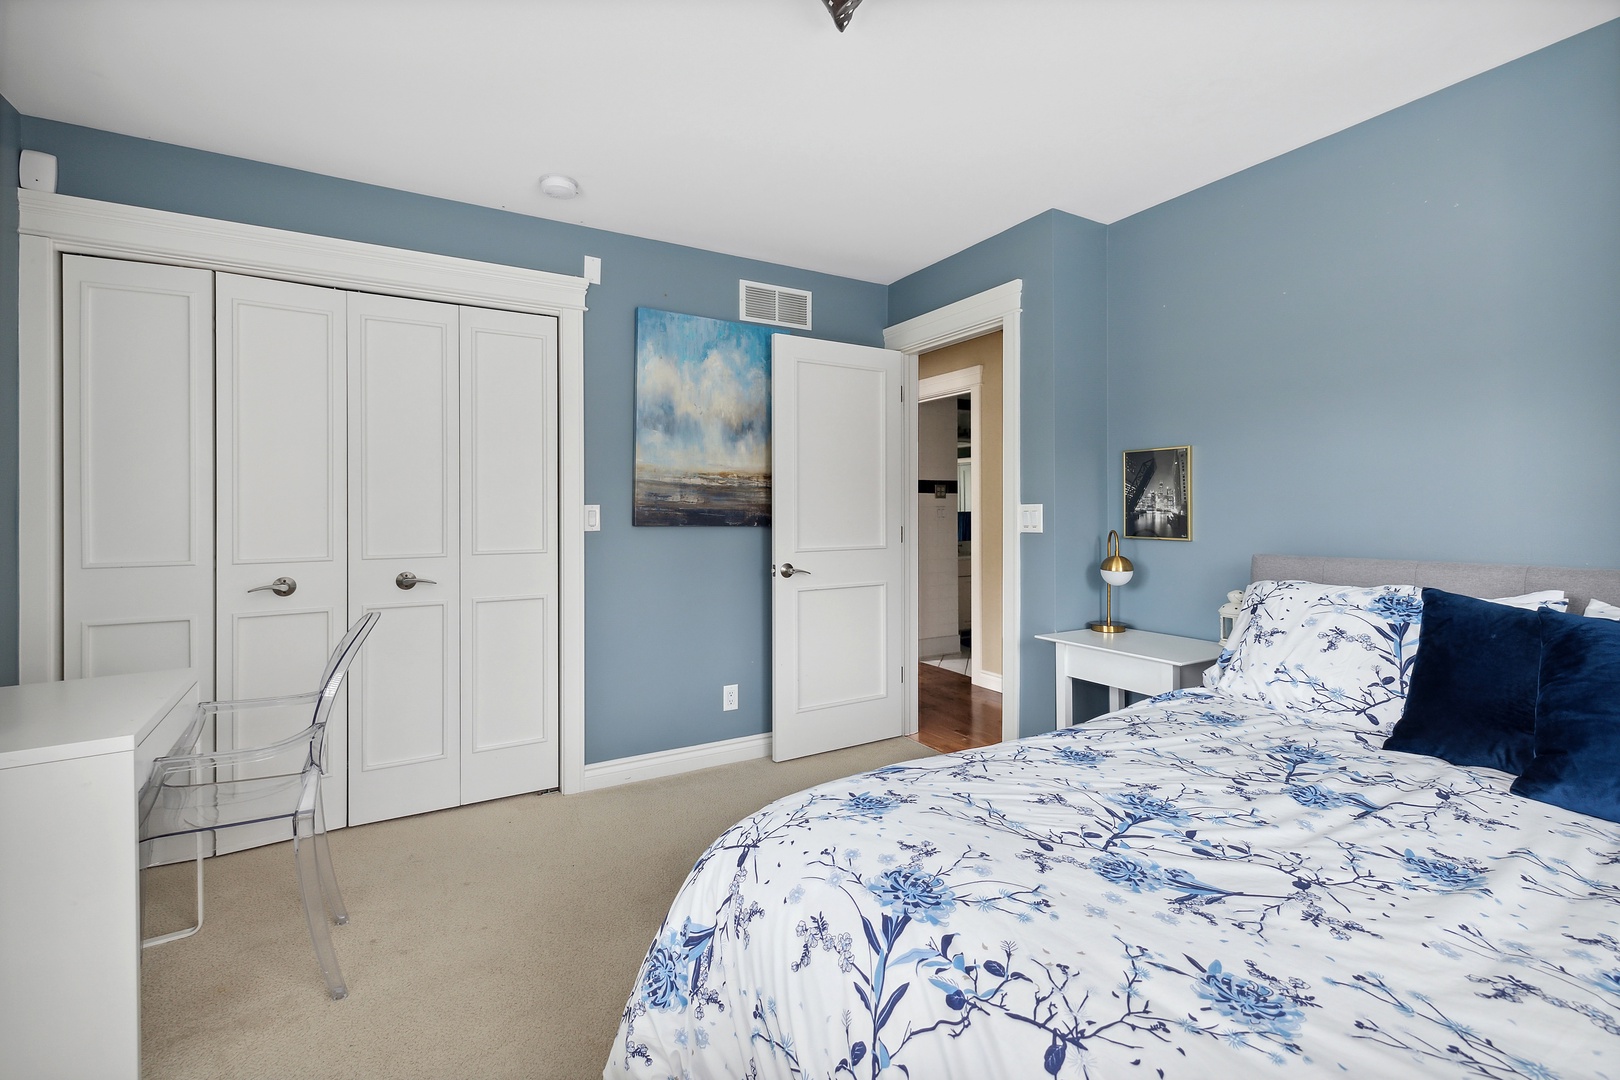 This bedroom offers everything you need for a restful and rejuvenating stay.